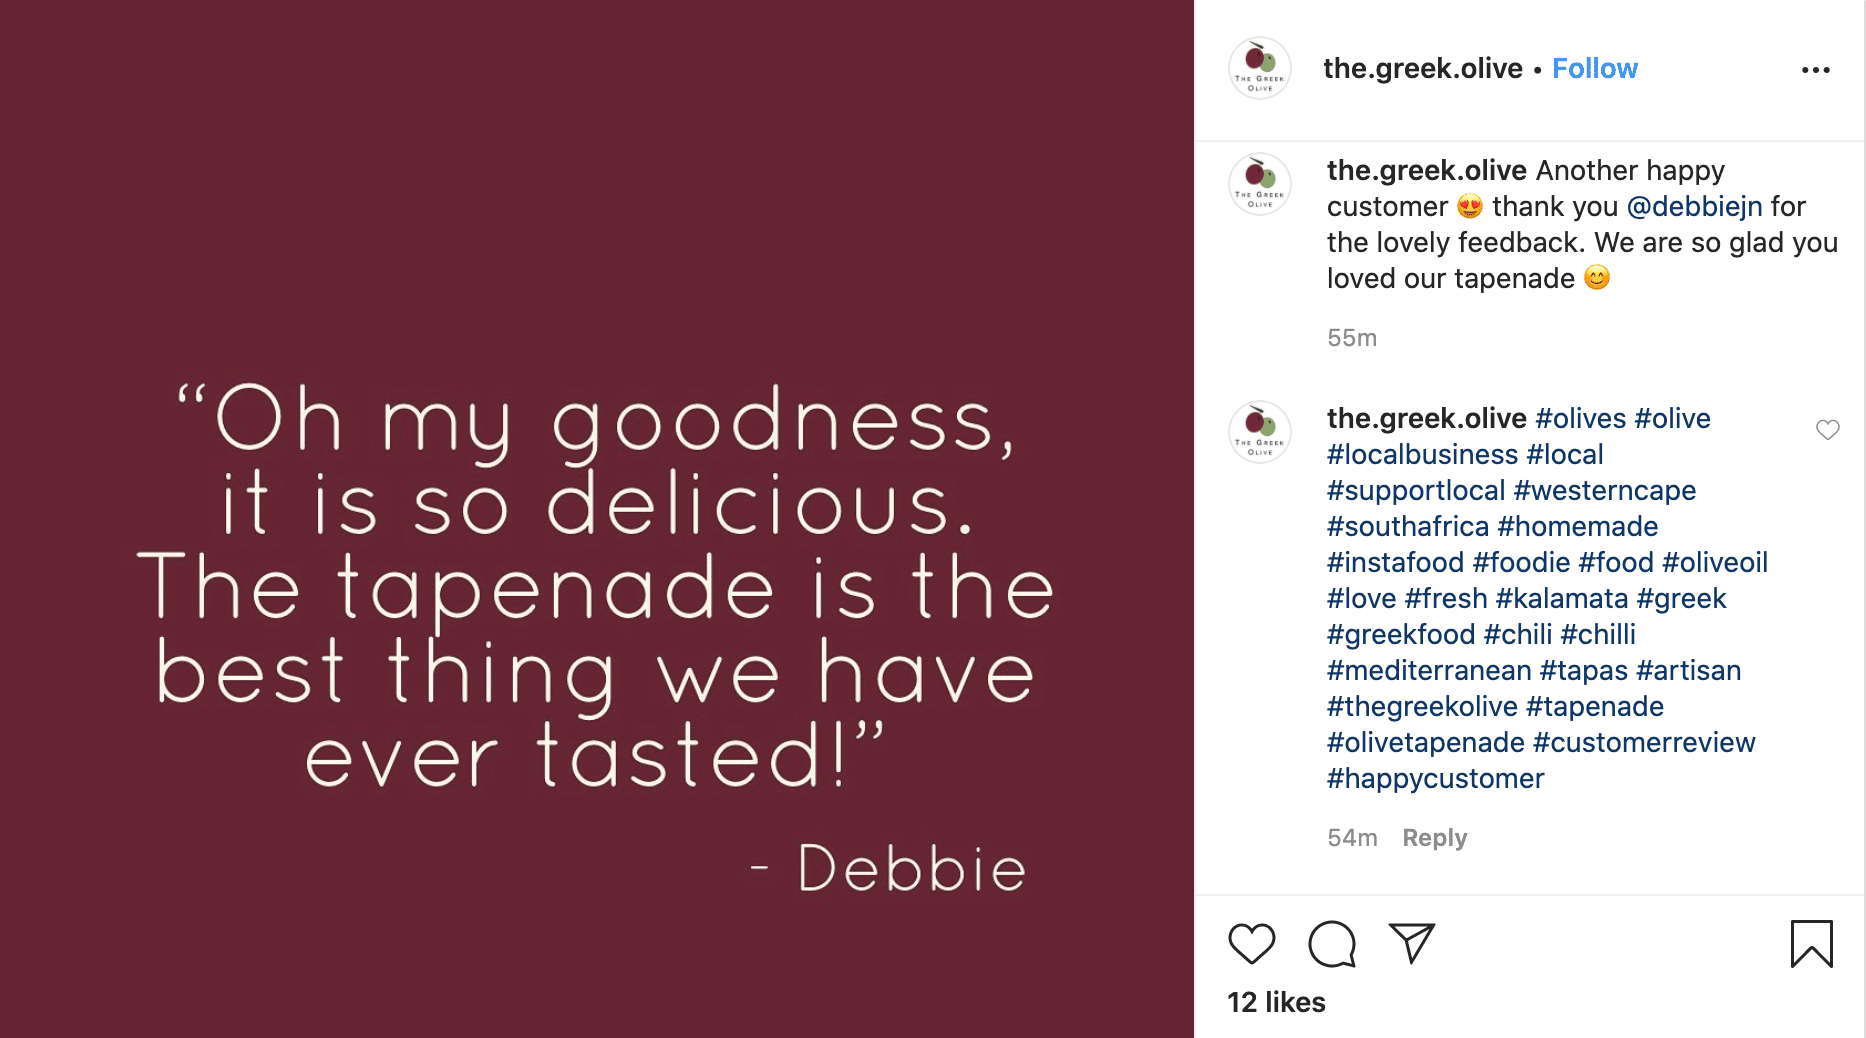 The Greek Olive, a small business out of South Africa, took a customer review, turned it into a quote on a clean background, and made an eye-catching Instagram post.